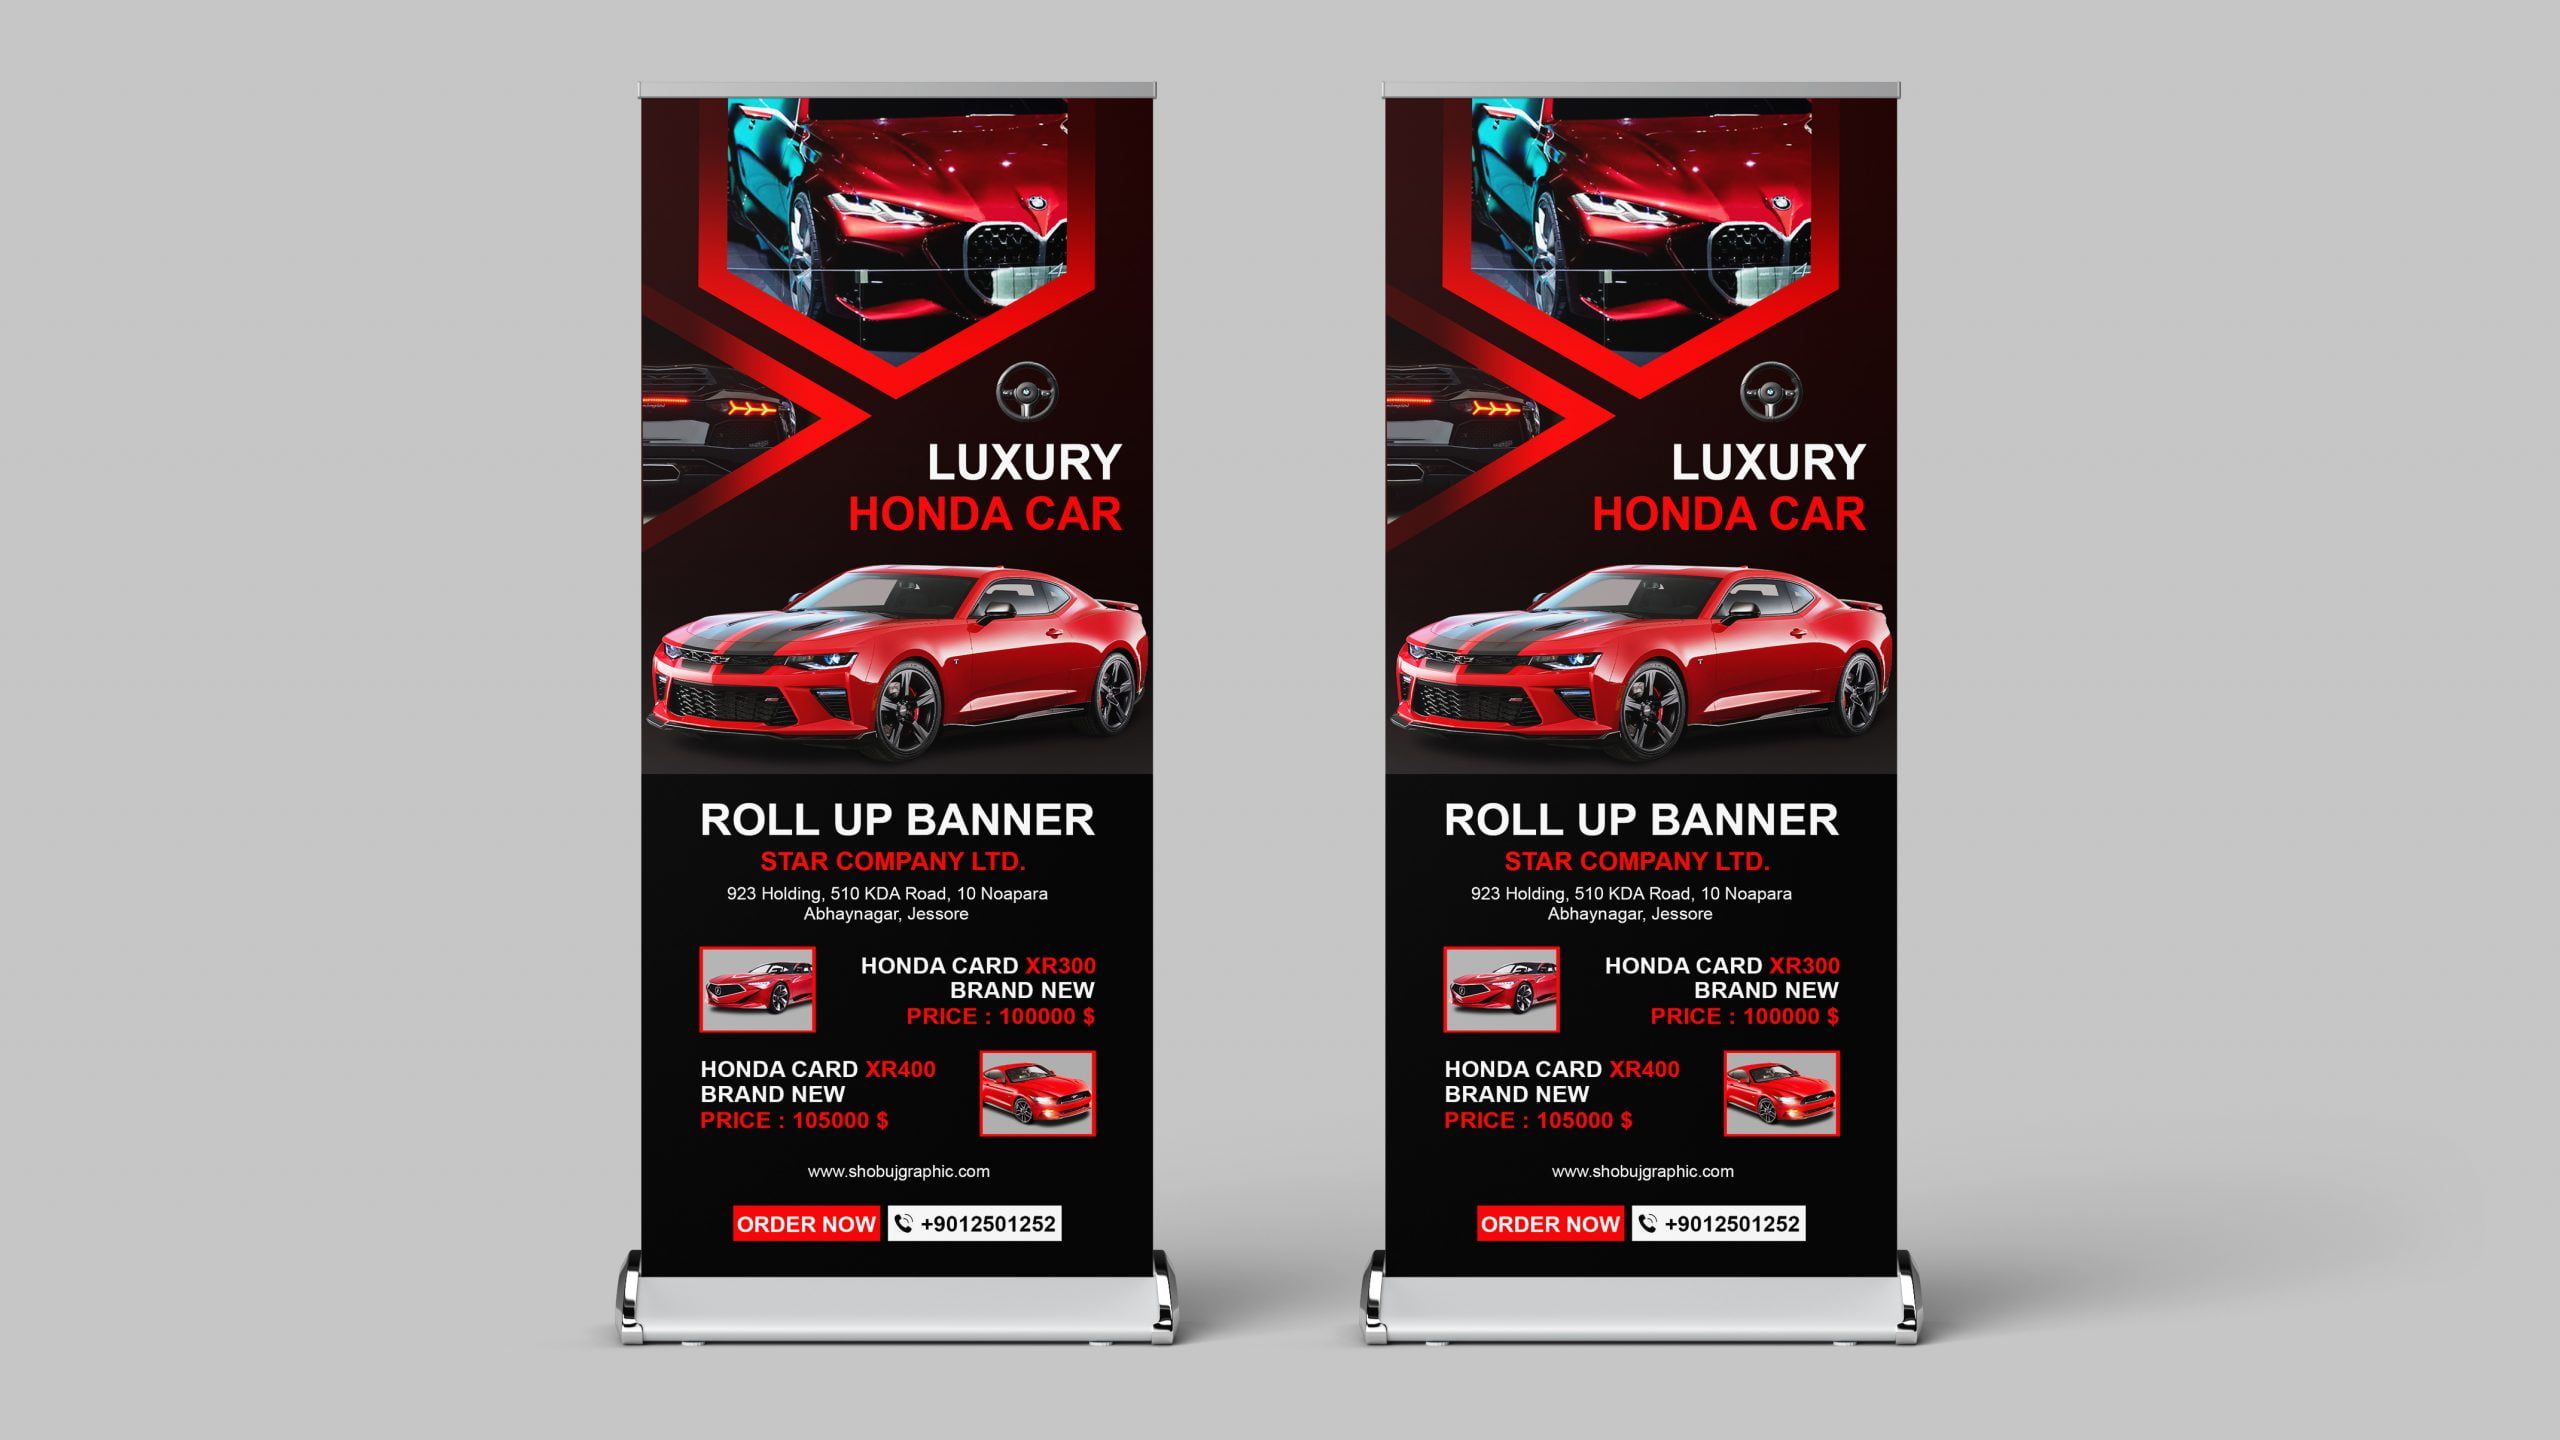 Roll up banner template For Luxury car showroom